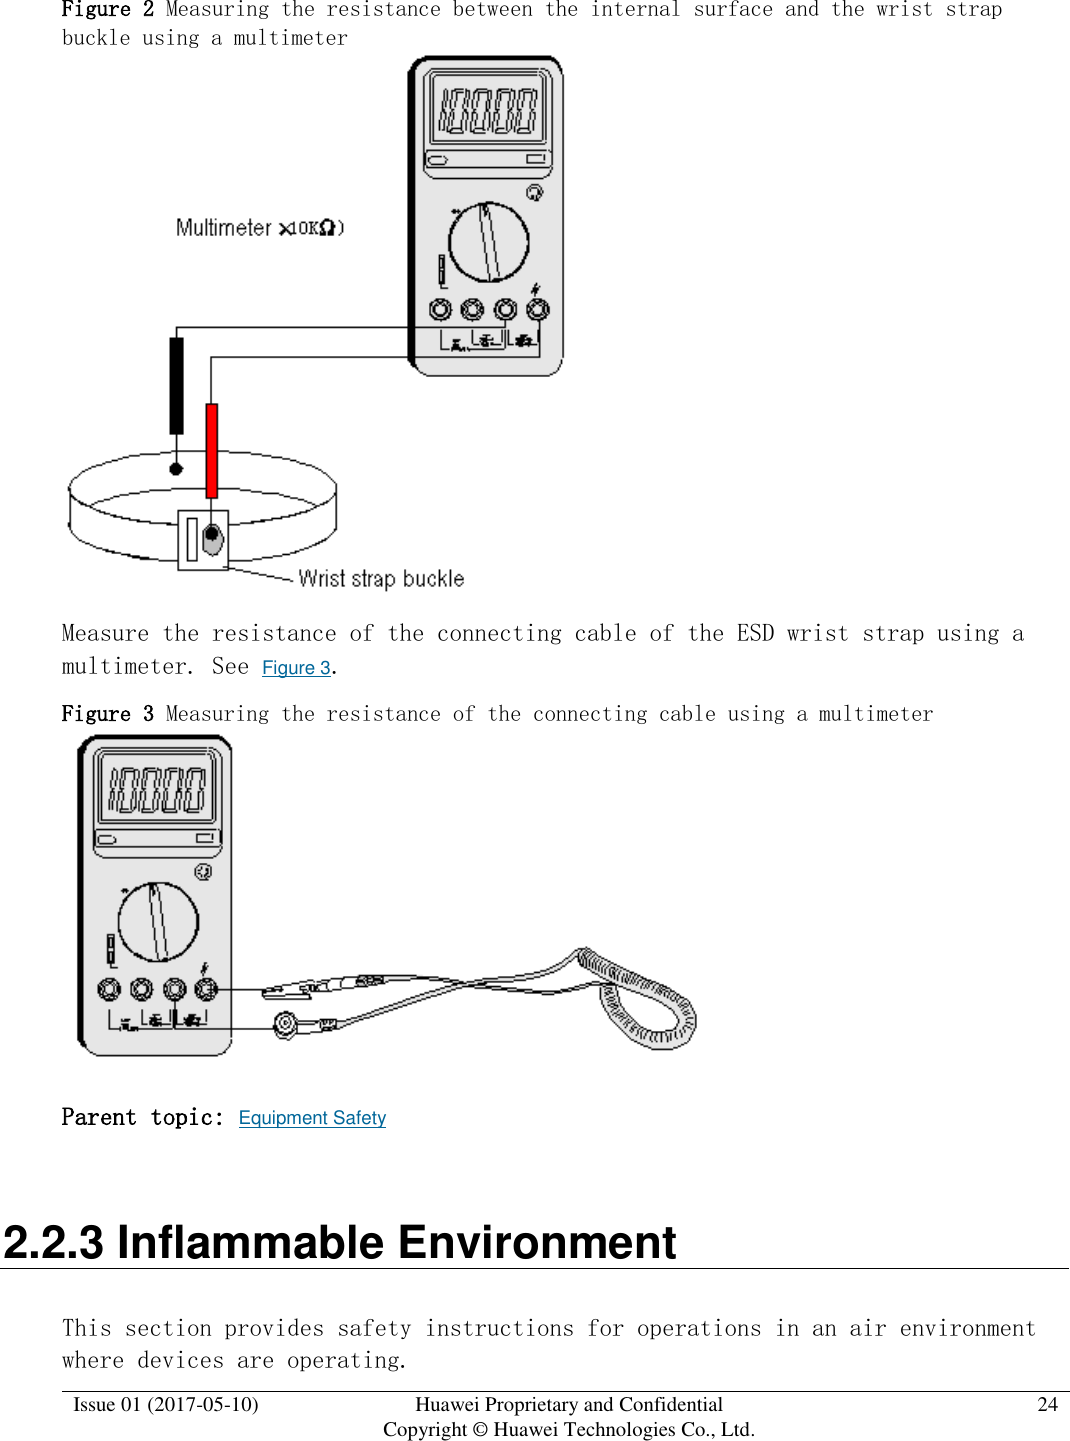  Issue 01 (2017-05-10) Huawei Proprietary and Confidential      Copyright © Huawei Technologies Co., Ltd. 24  Figure 2 Measuring the resistance between the internal surface and the wrist strap buckle using a multimeter   Measure the resistance of the connecting cable of the ESD wrist strap using a multimeter. See Figure 3. Figure 3 Measuring the resistance of the connecting cable using a multimeter   Parent topic: Equipment Safety 2.2.3 Inflammable Environment This section provides safety instructions for operations in an air environment where devices are operating. 